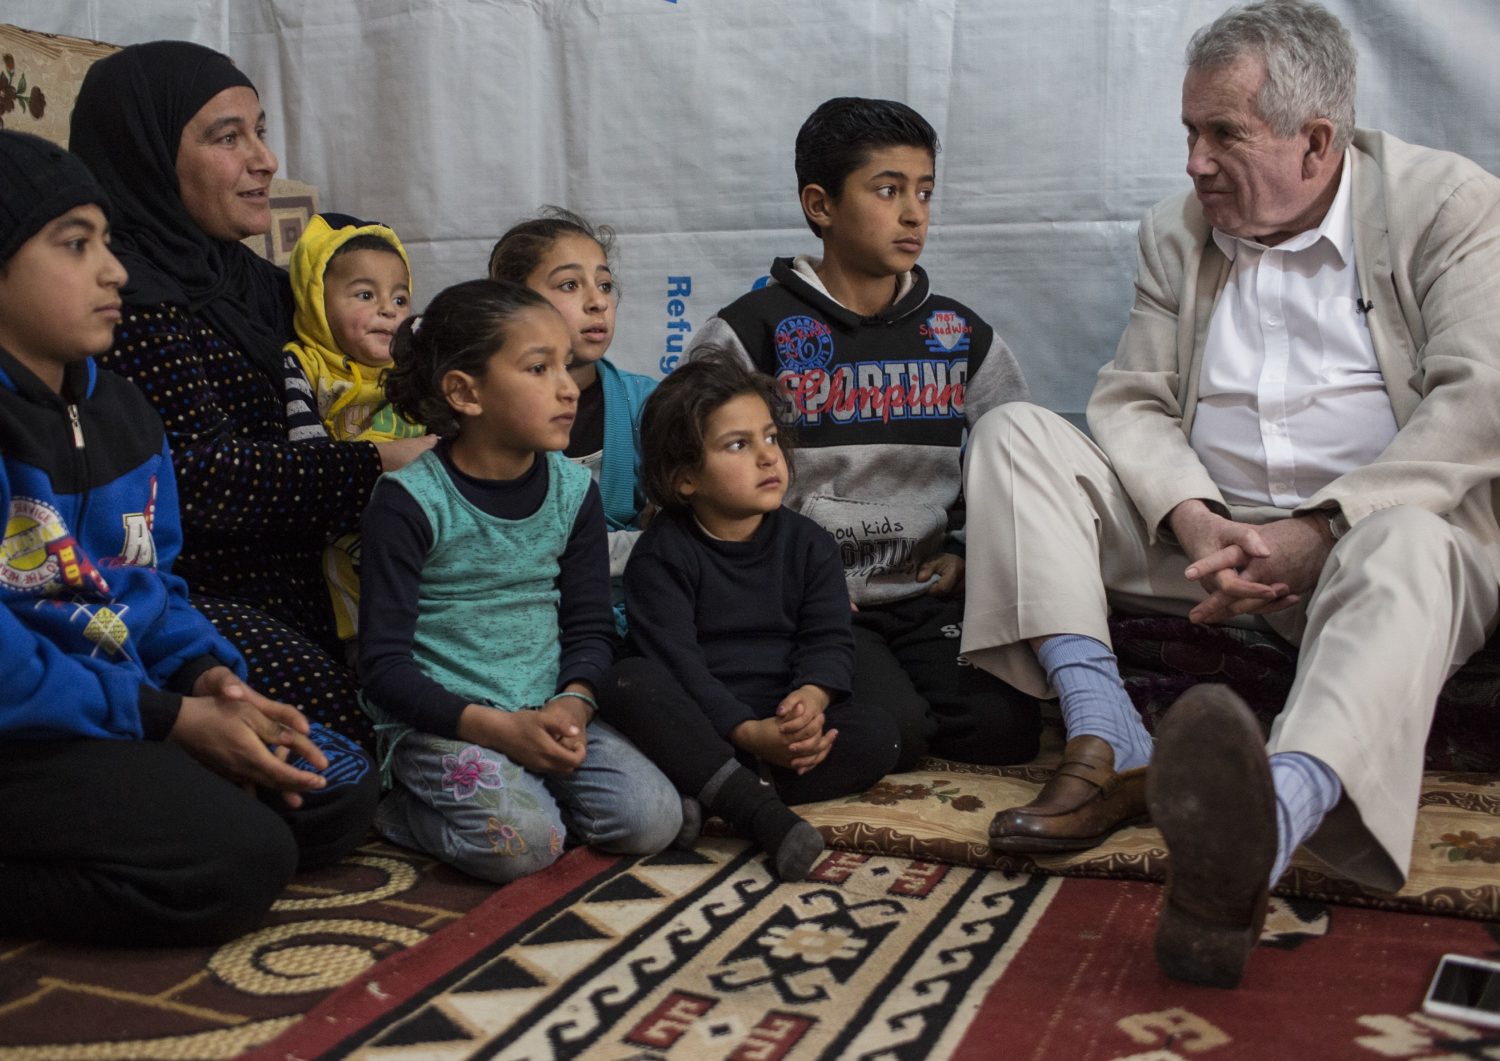 Martin Bell, UNICEF UK Ambassador and veteran BBC reporter (right), meets with Nisrine, 31 (2nd from left) who fled Raqqa six months ago. He talks about the change you make through a Unicef Gift in Your Will.